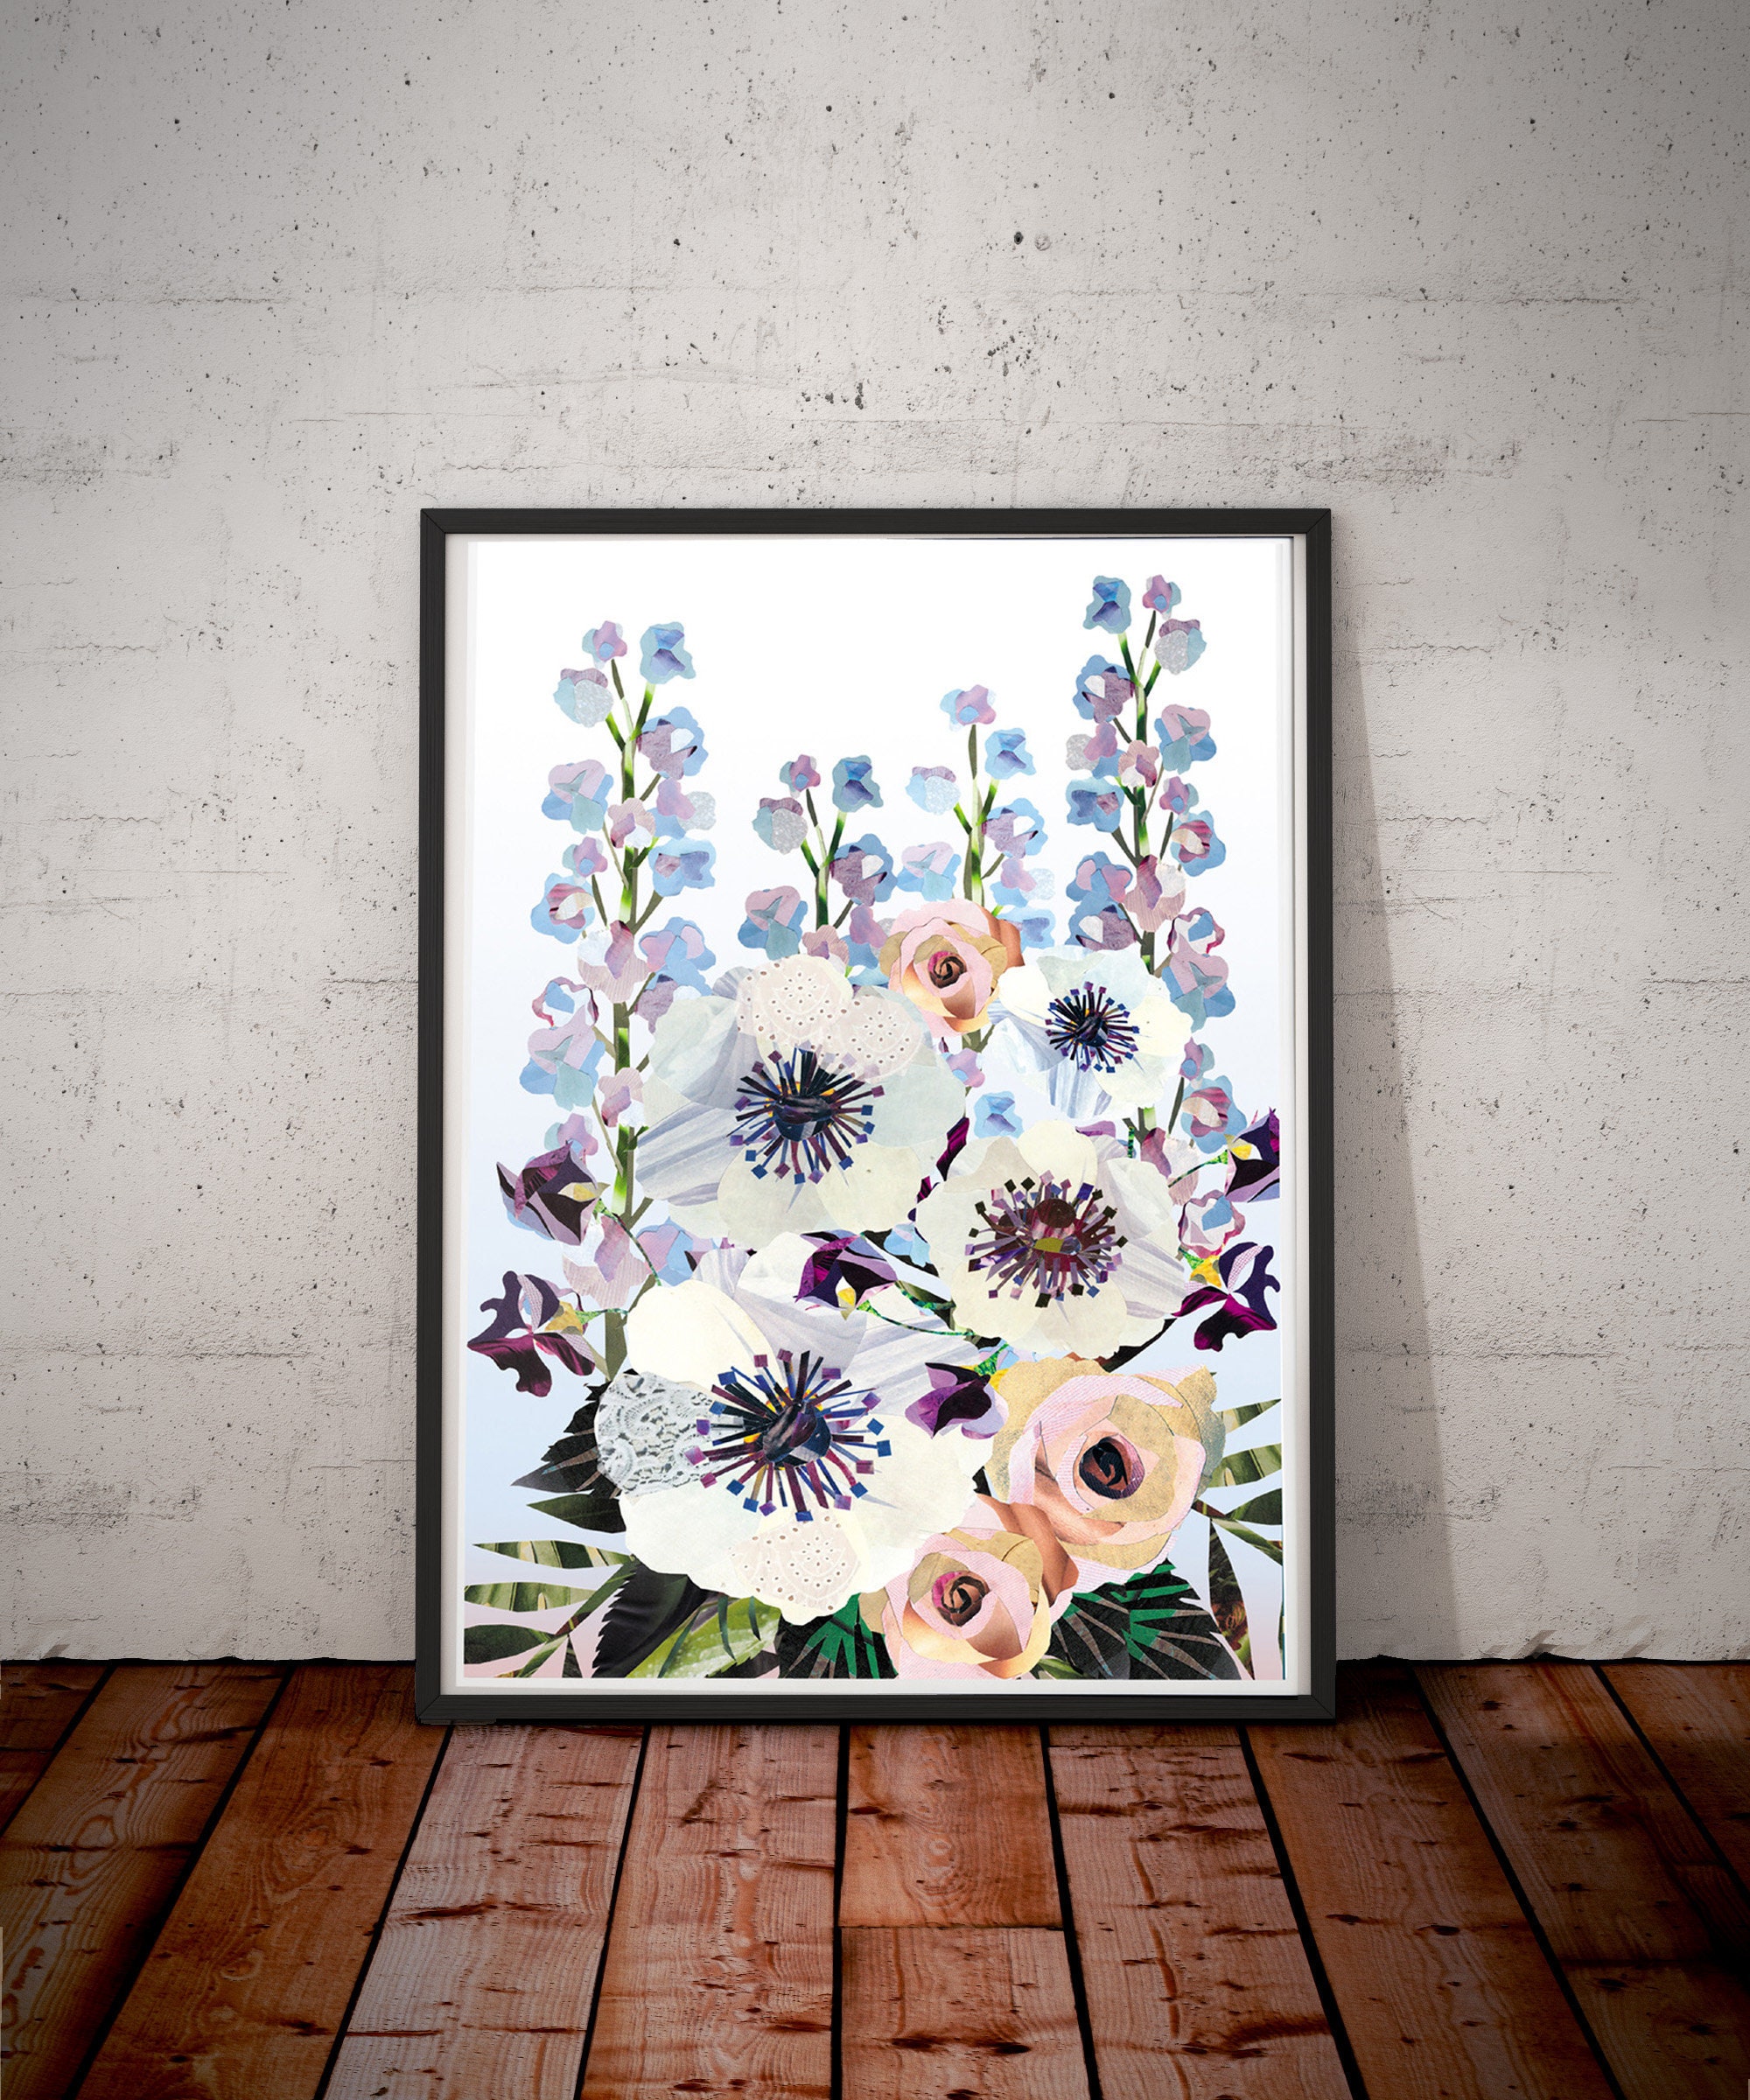 - ǀ A1 Home Contemporary Statement Lilac Poster Botanical, Decor, Wall Art, Bouquet, Etsy Collage Art, Floral Anemone